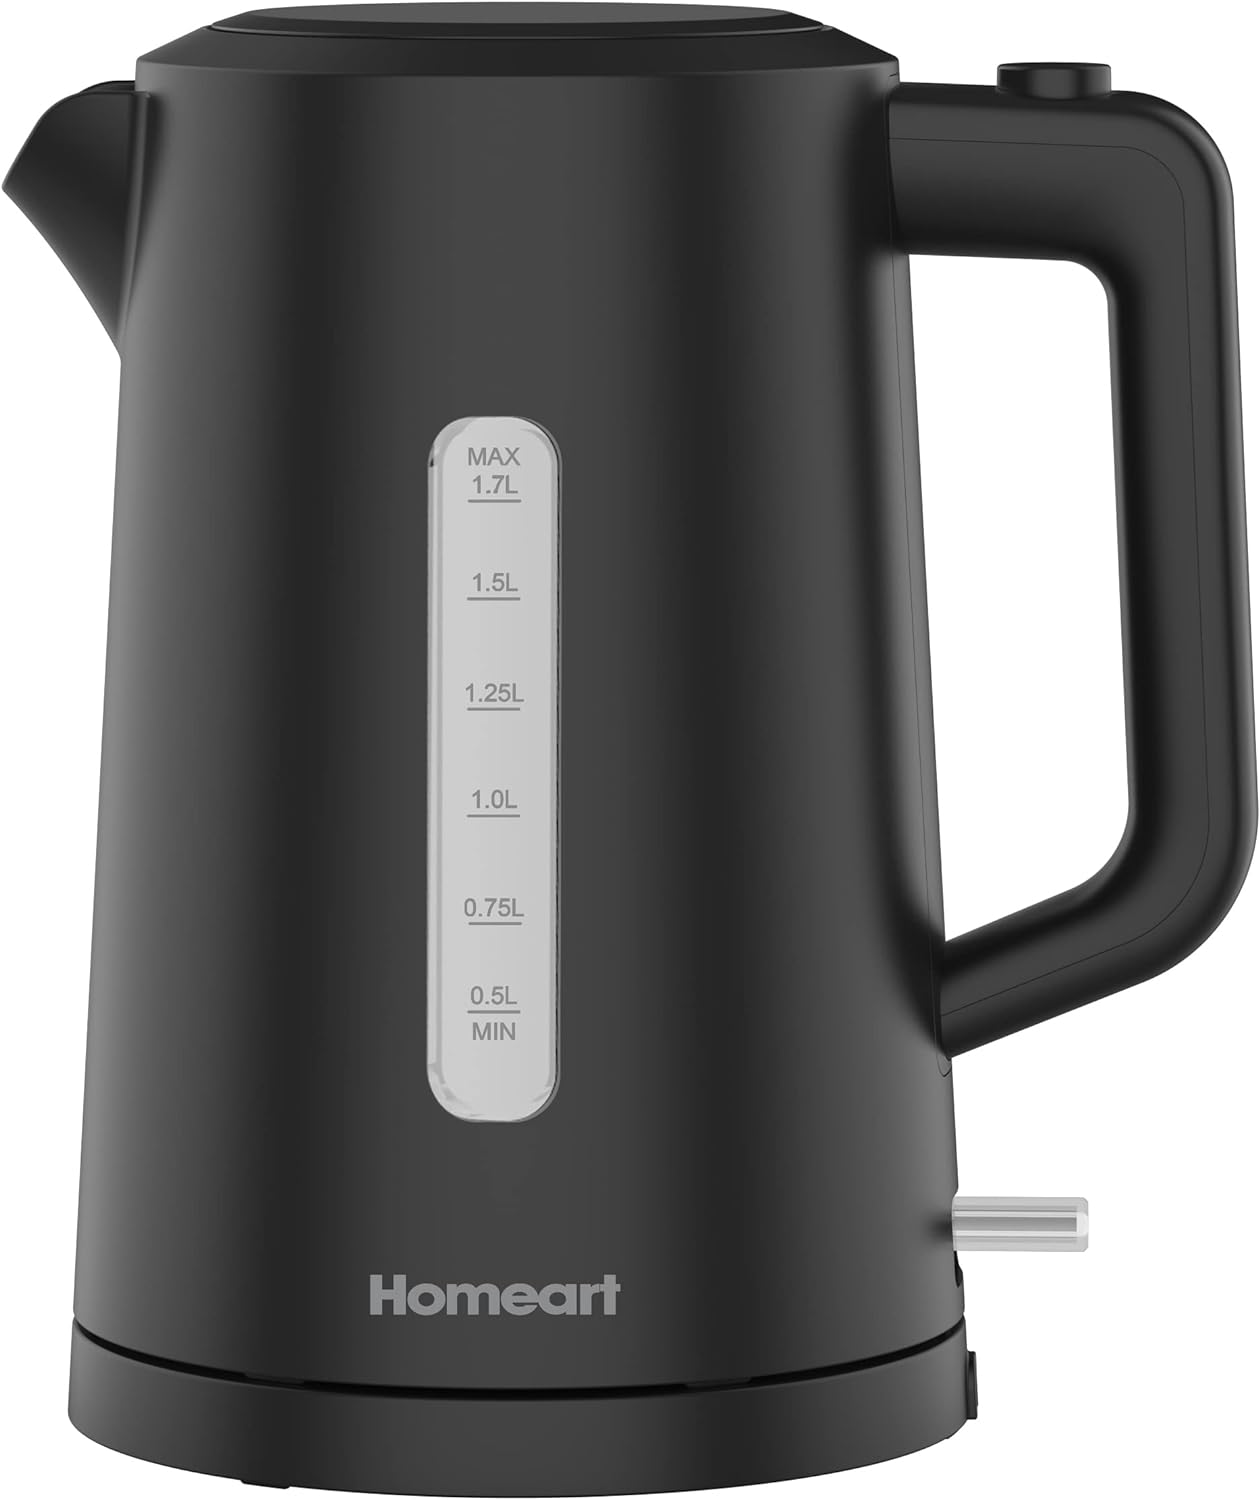 Homeart Staple Cordless Electric Kettle Stainless Steel With Removable Filter and 2-Slice Toaster Stainless Steel With Removable Crumb Tray Combo, Black